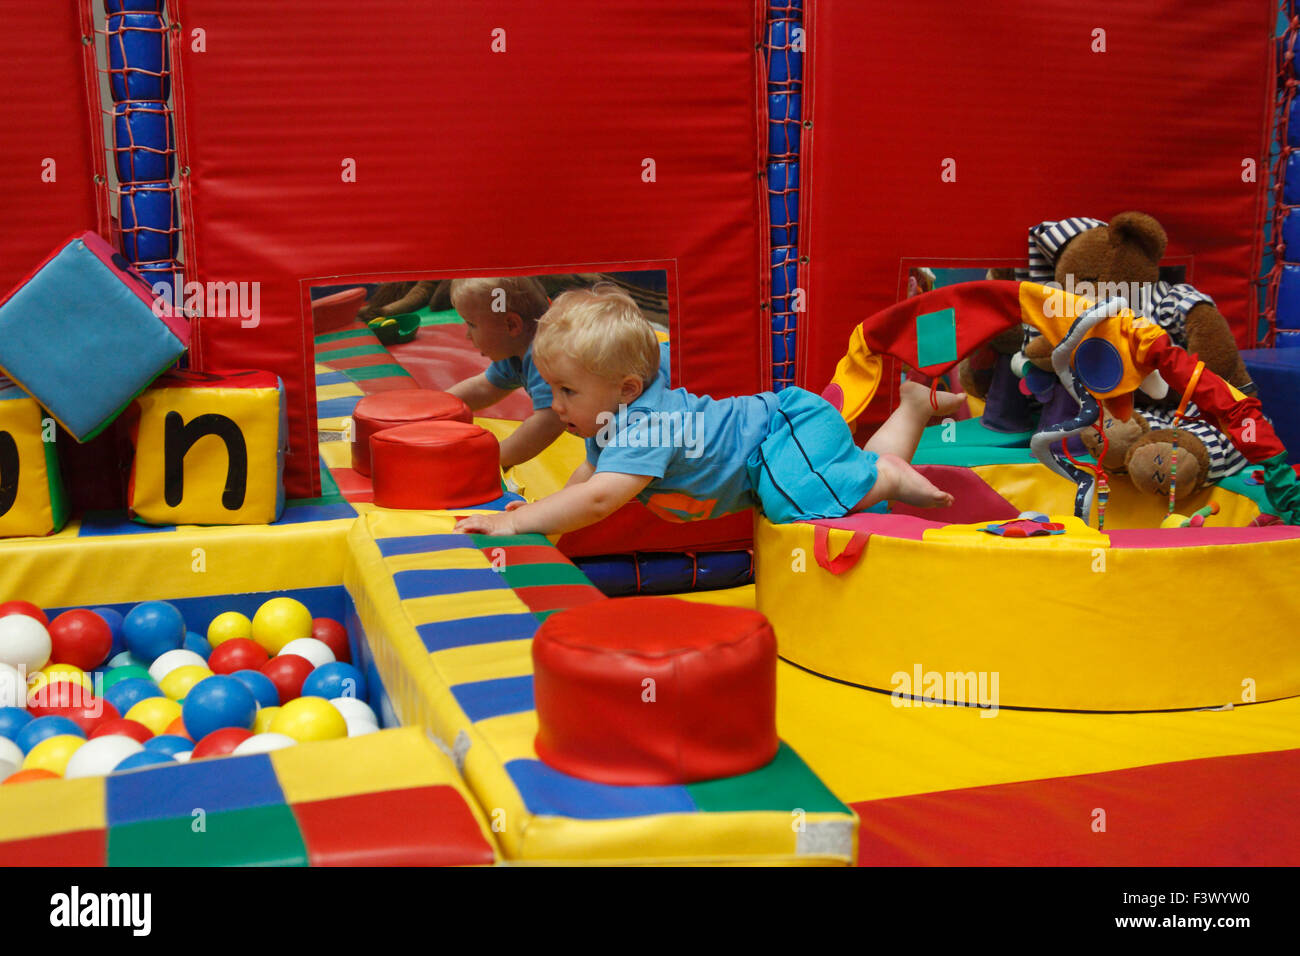 Toddler learning to negotiate objects in relative safety in a play barn Stock Photo